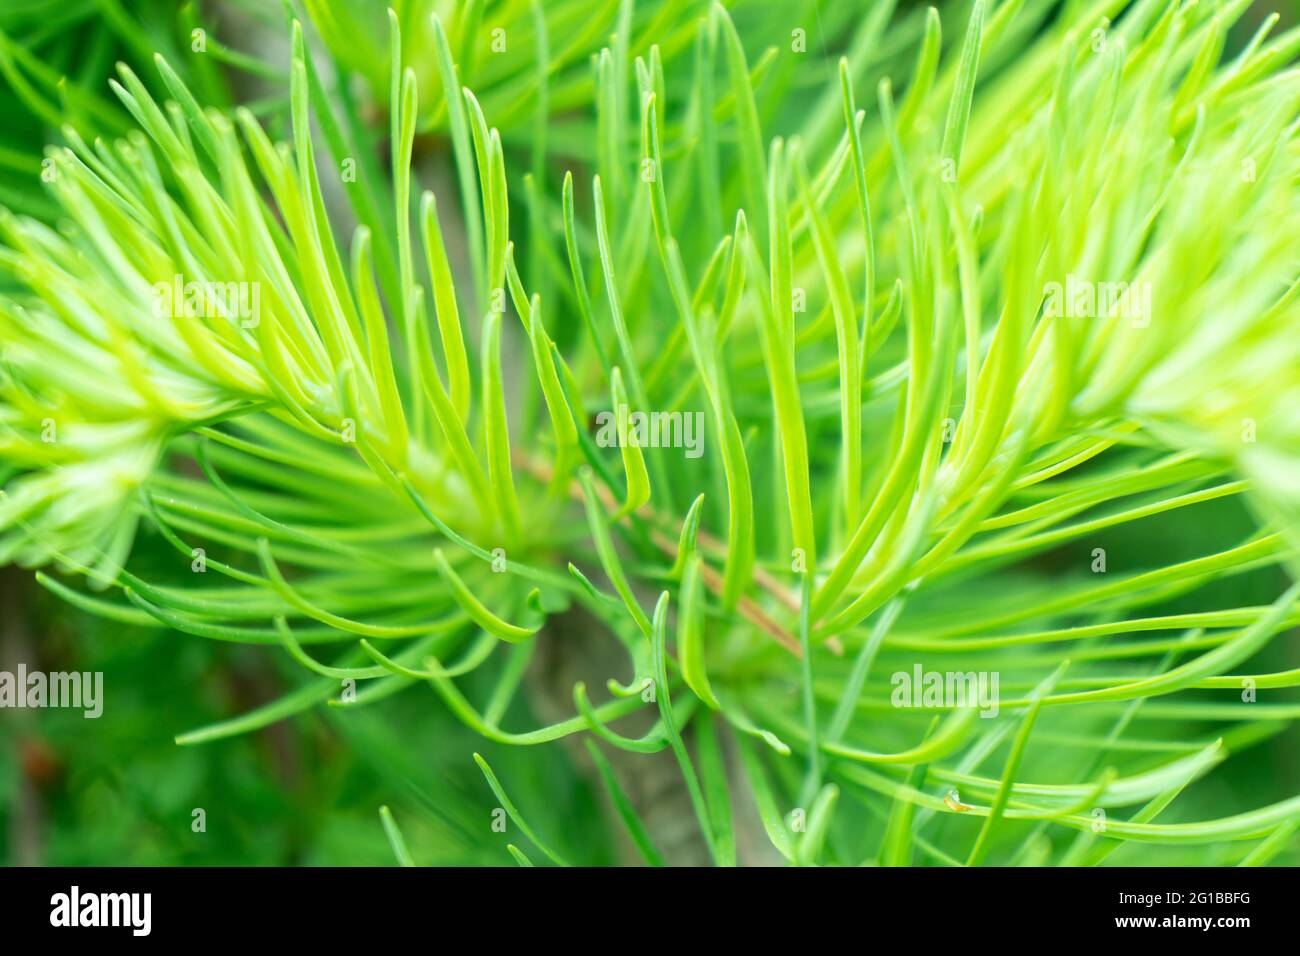 Macro shot green fir tree branch. Frame of evergreen pine needles. Pine tree branch close up. Christmas mockup with fir branches background. Stock Photo